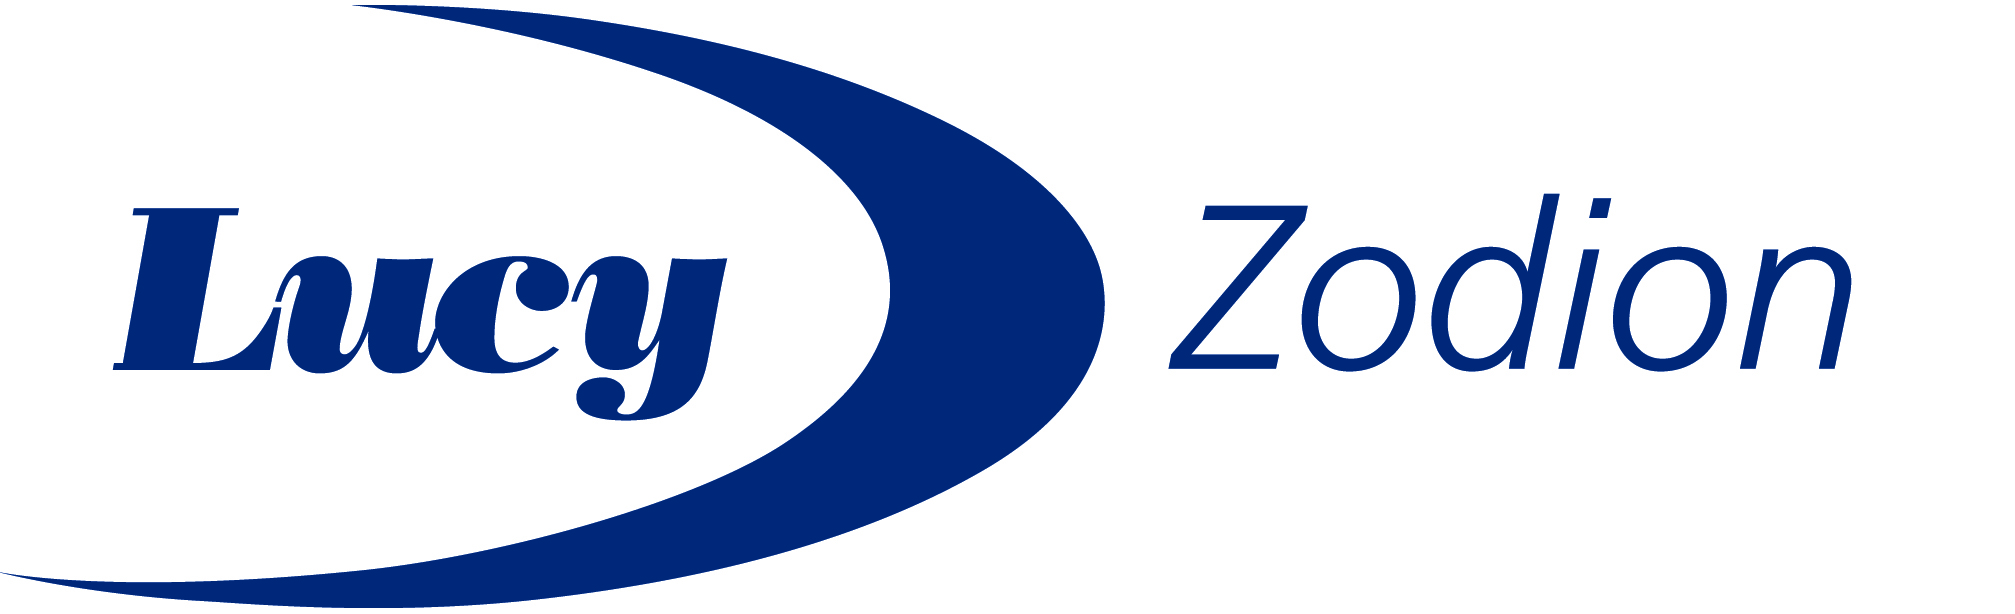 Lucy Zodion logo